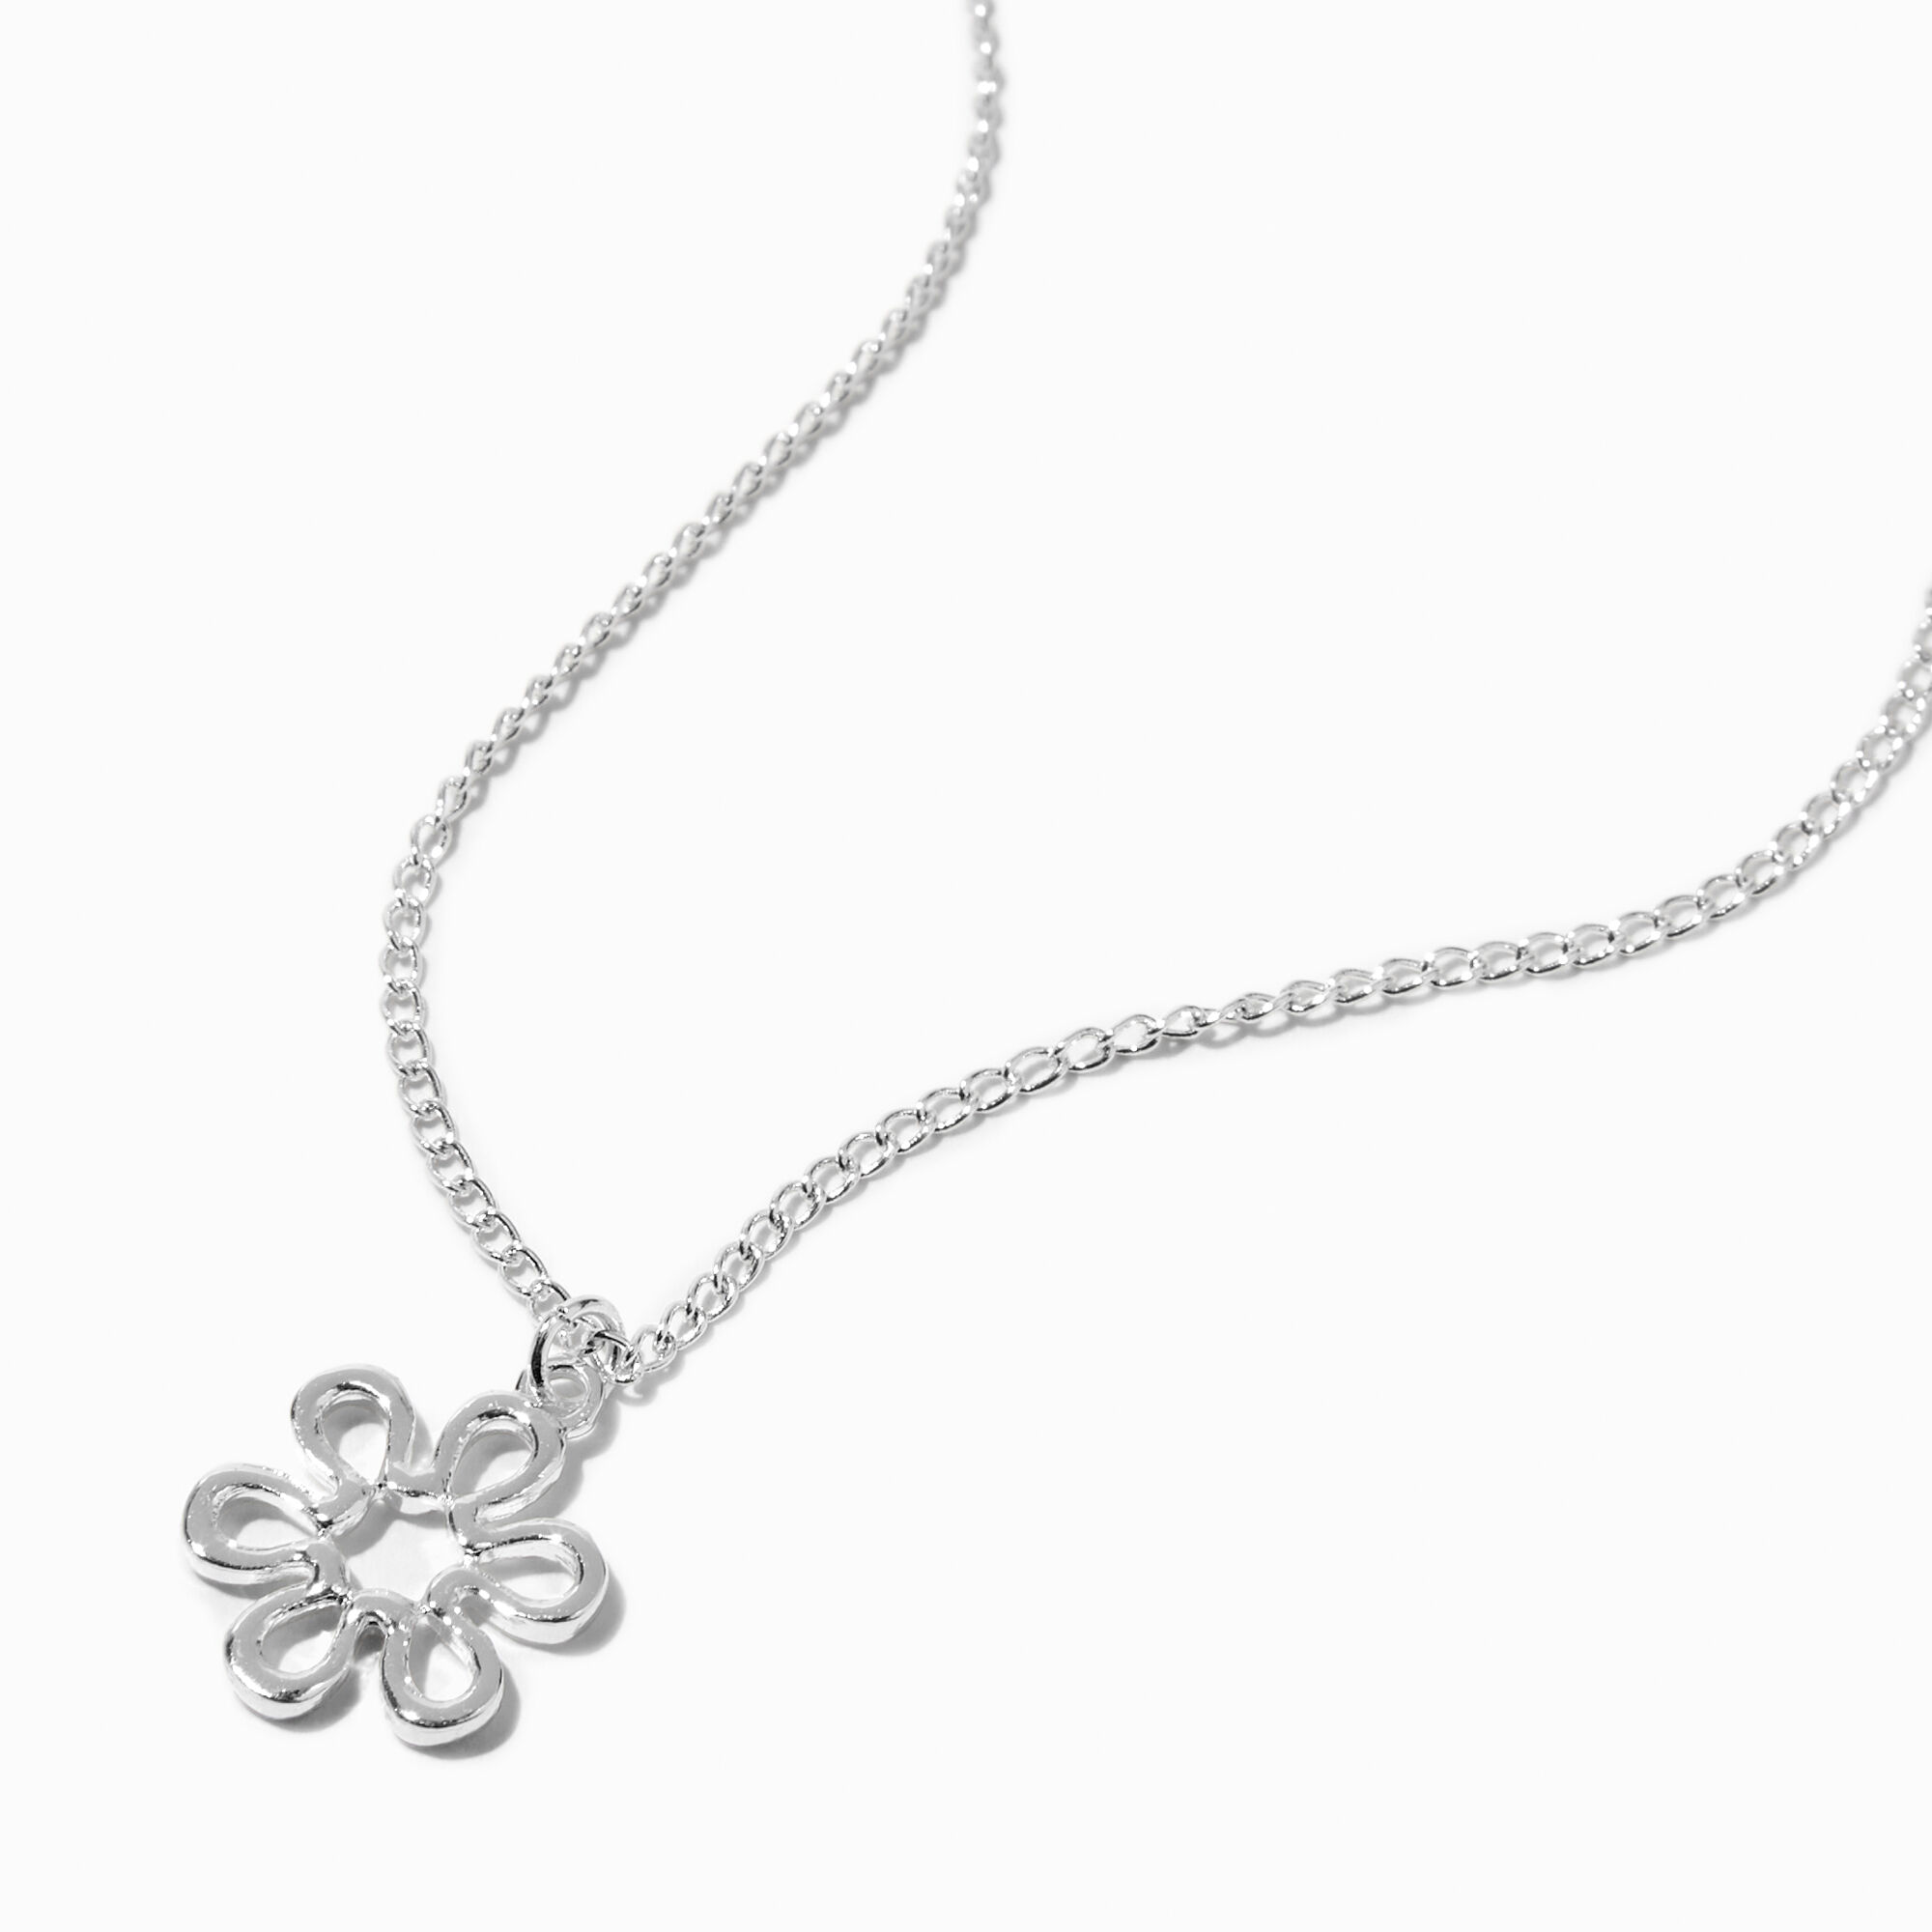 View Claires Recycled Jewelry Tone Daisy Outline Pendant Necklace Silver information